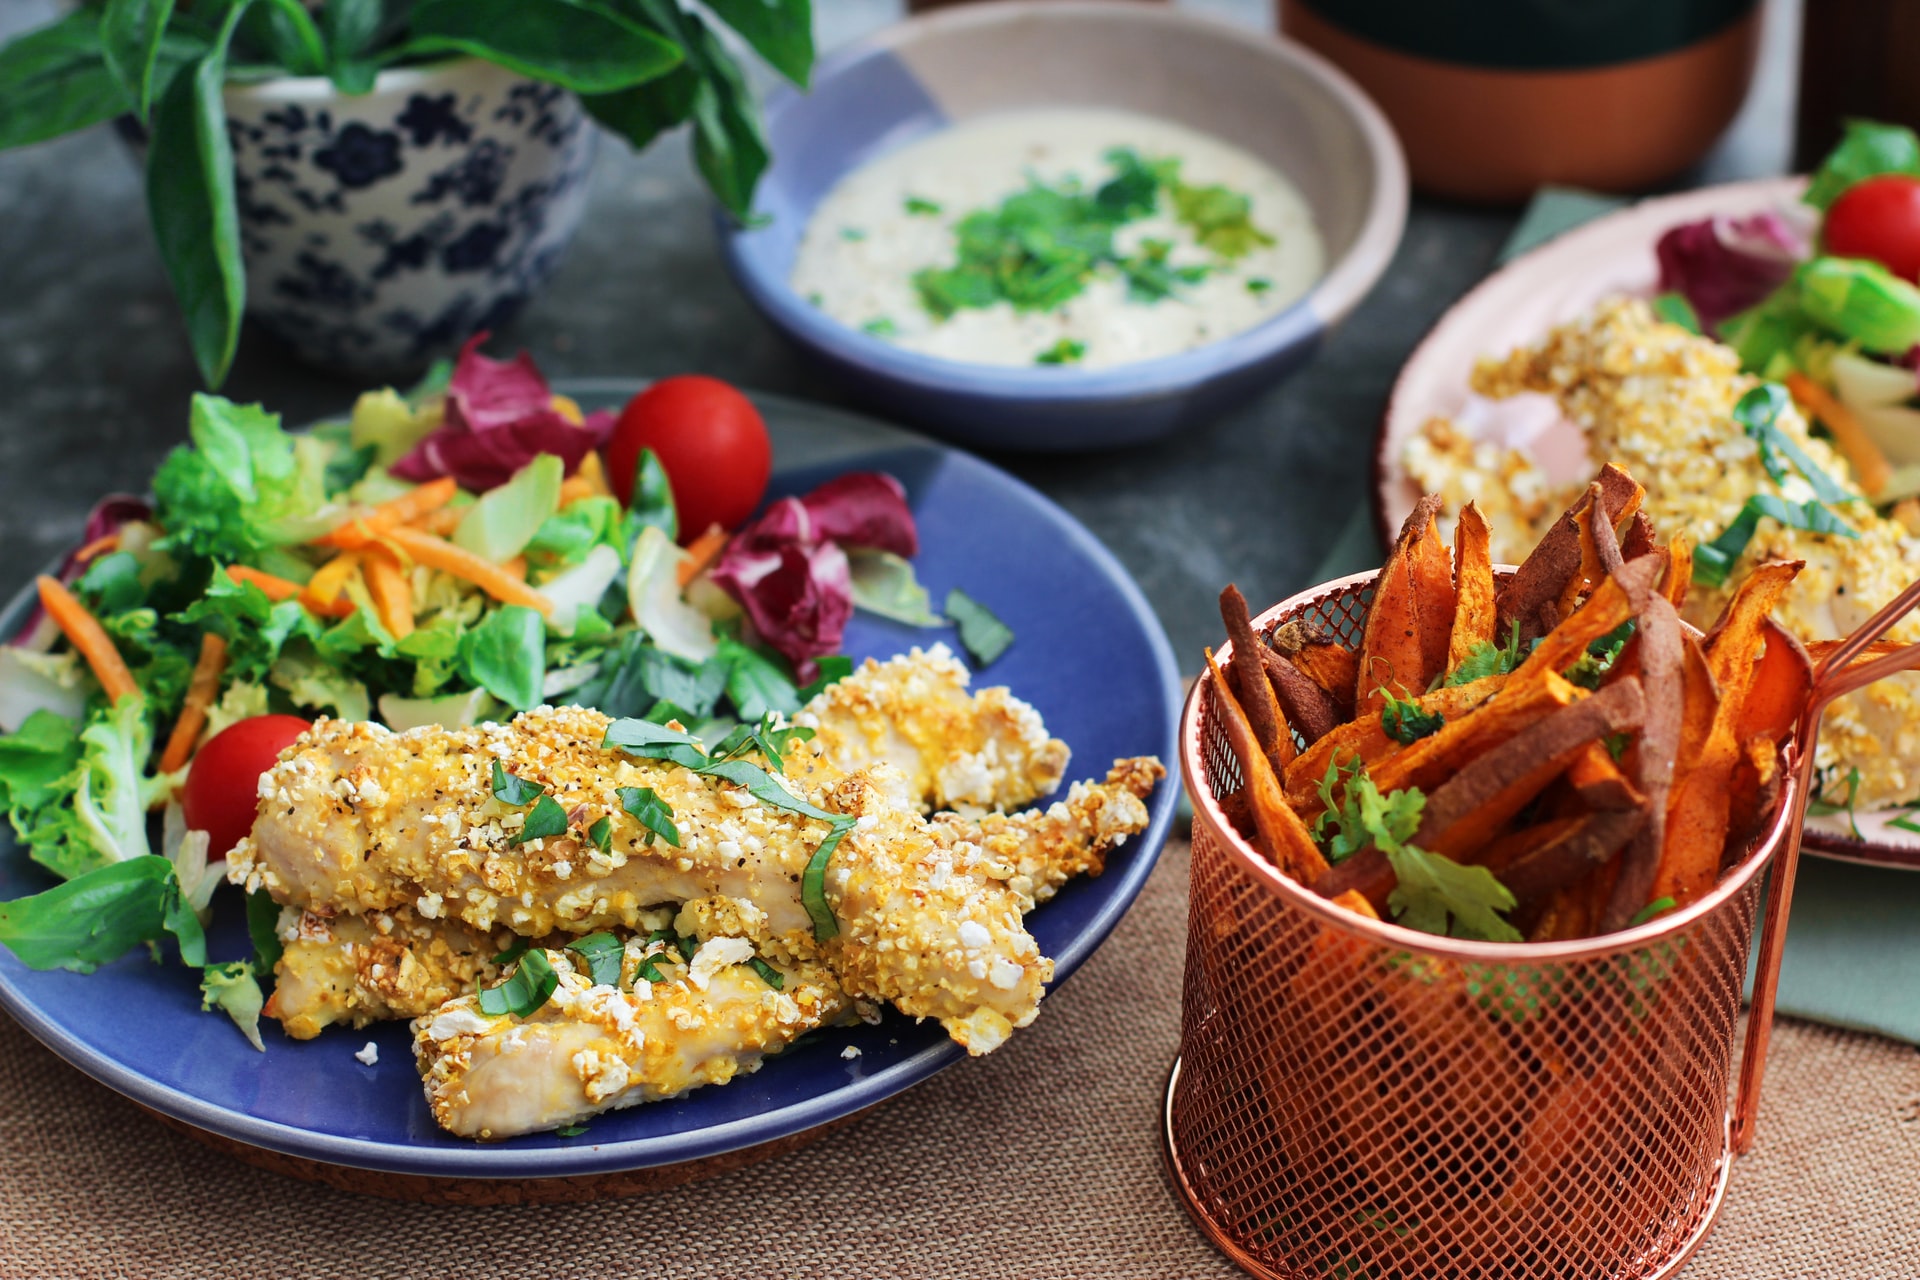 Popcorn coated chicken with a salad and sweet potato fries